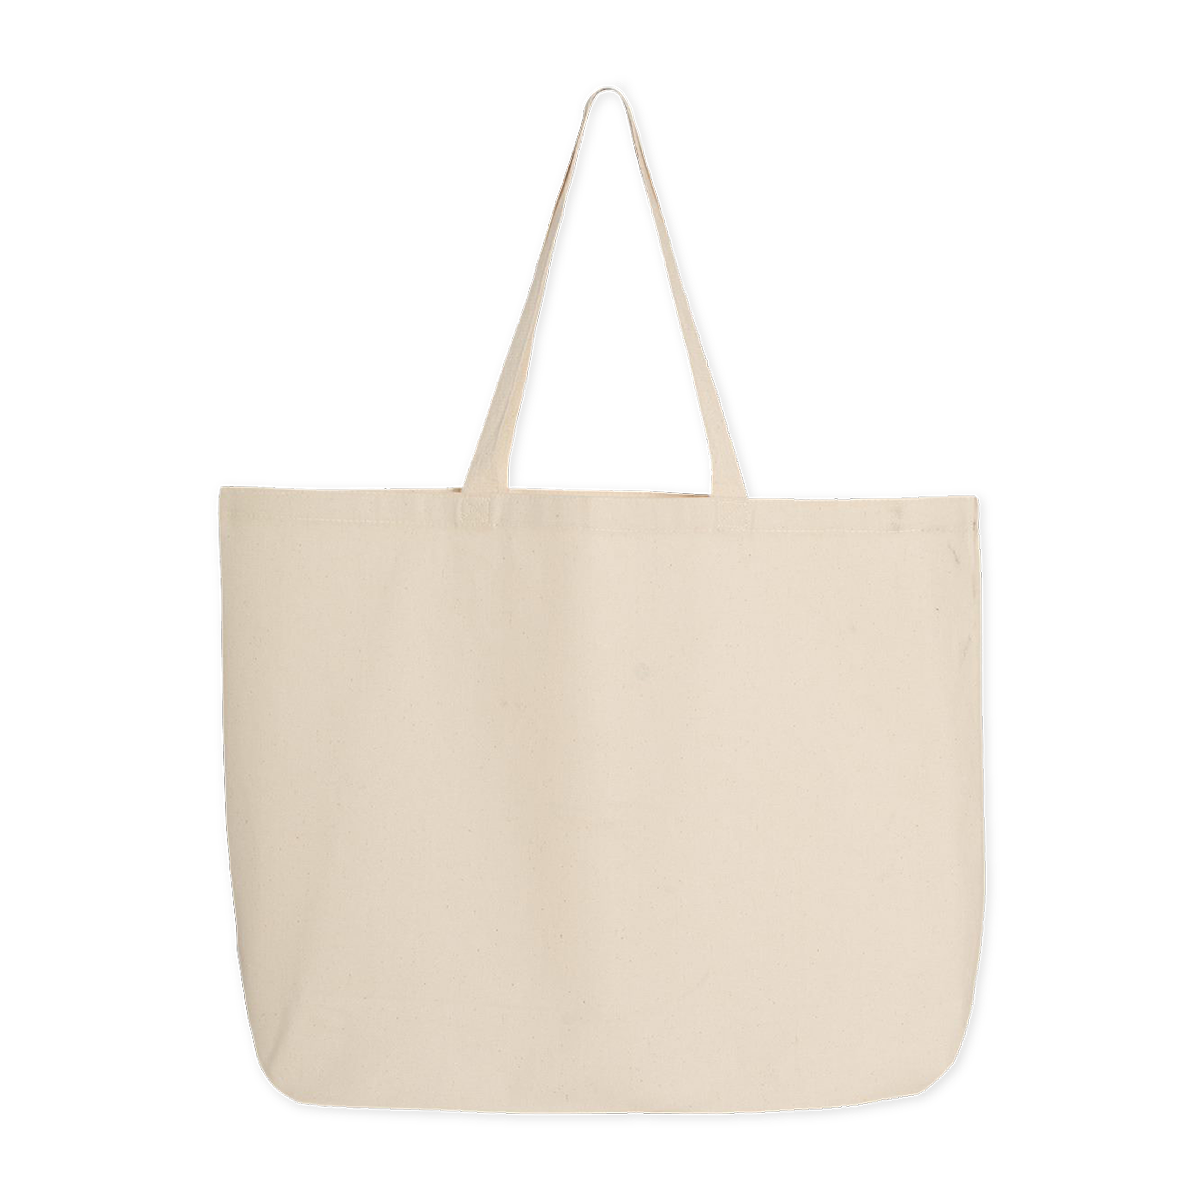 The Gist Text Tote